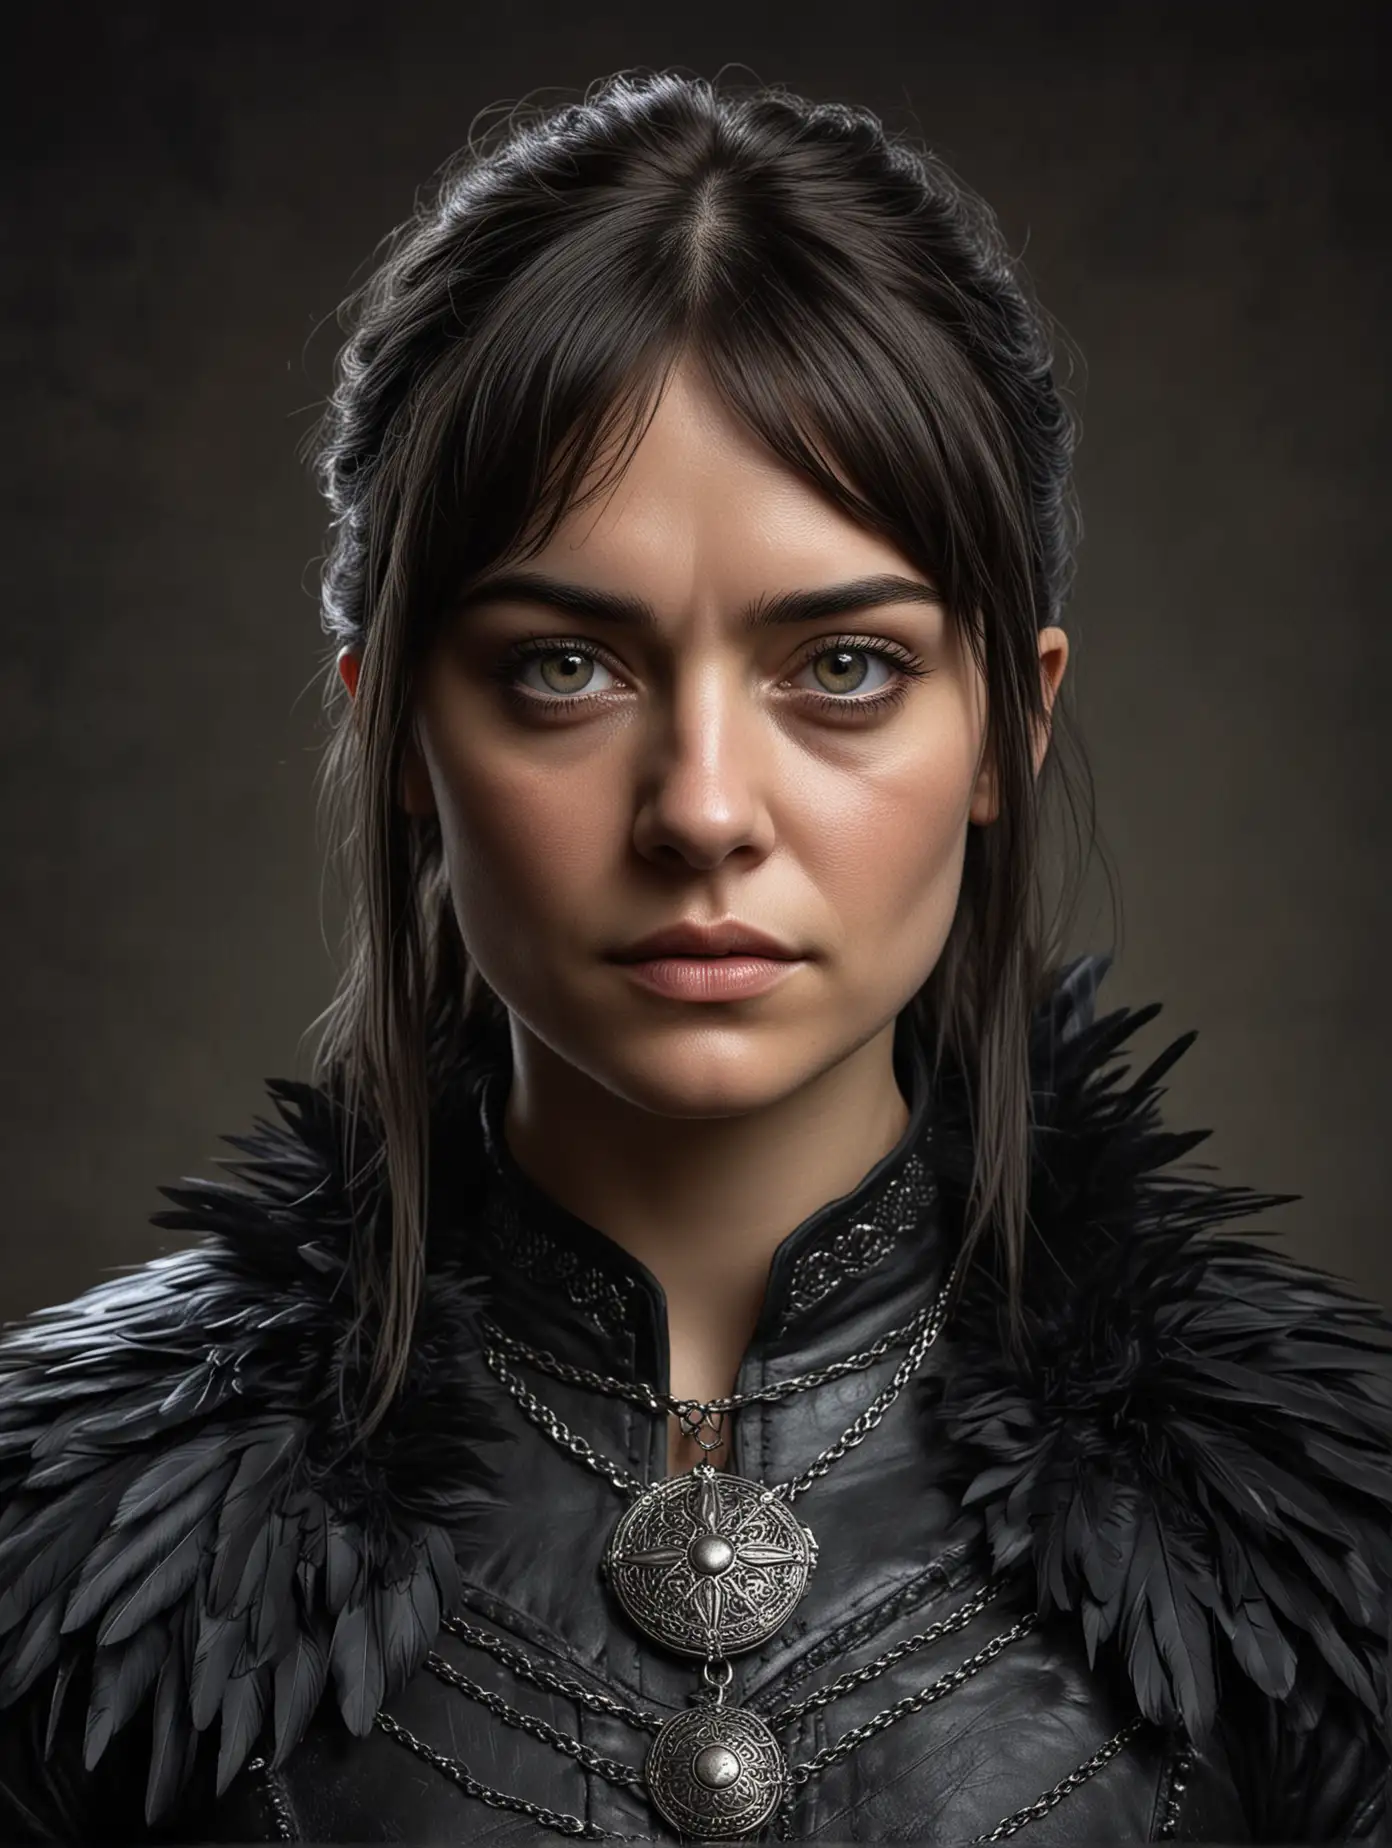 Hyperrealistic Portrait of Arya Stark from Game of Thrones